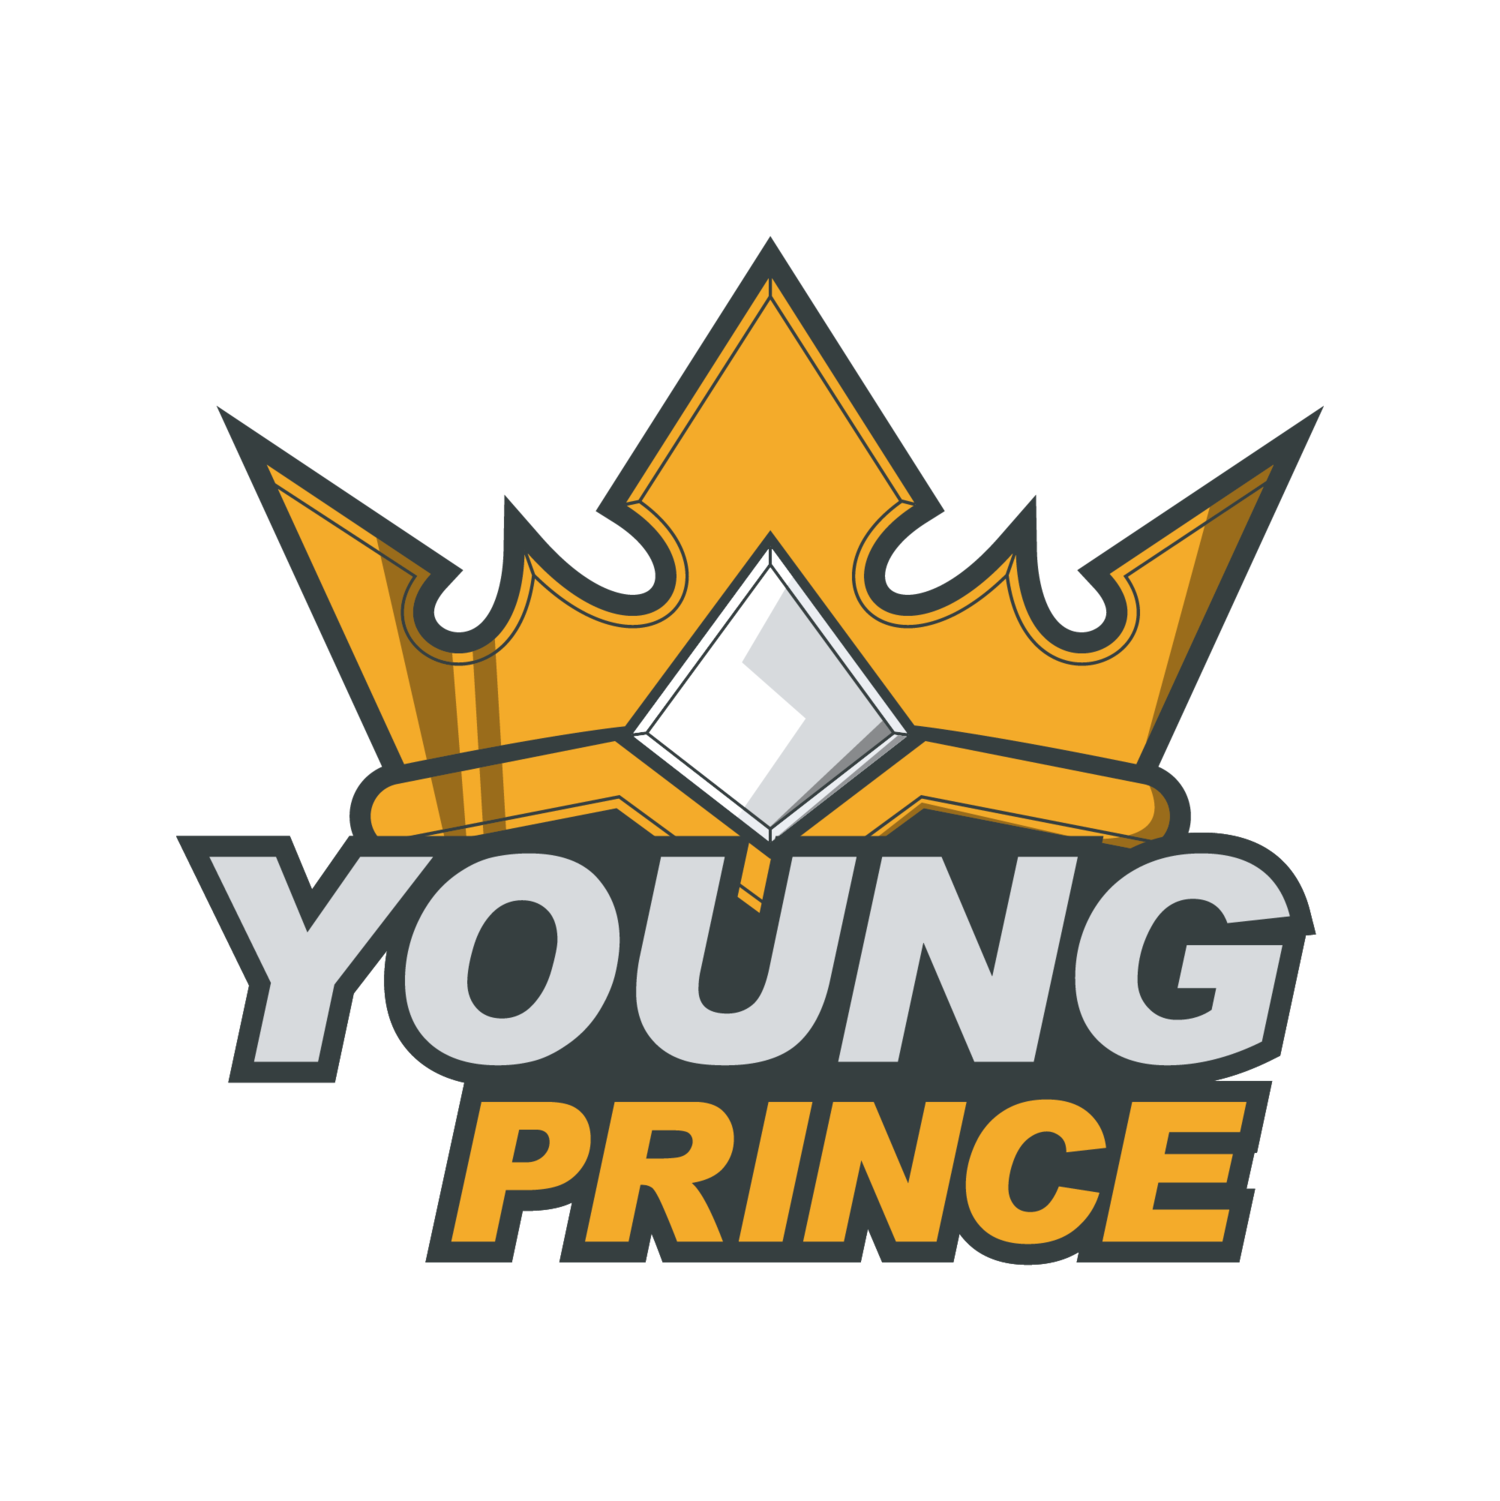 I Am Young Prince